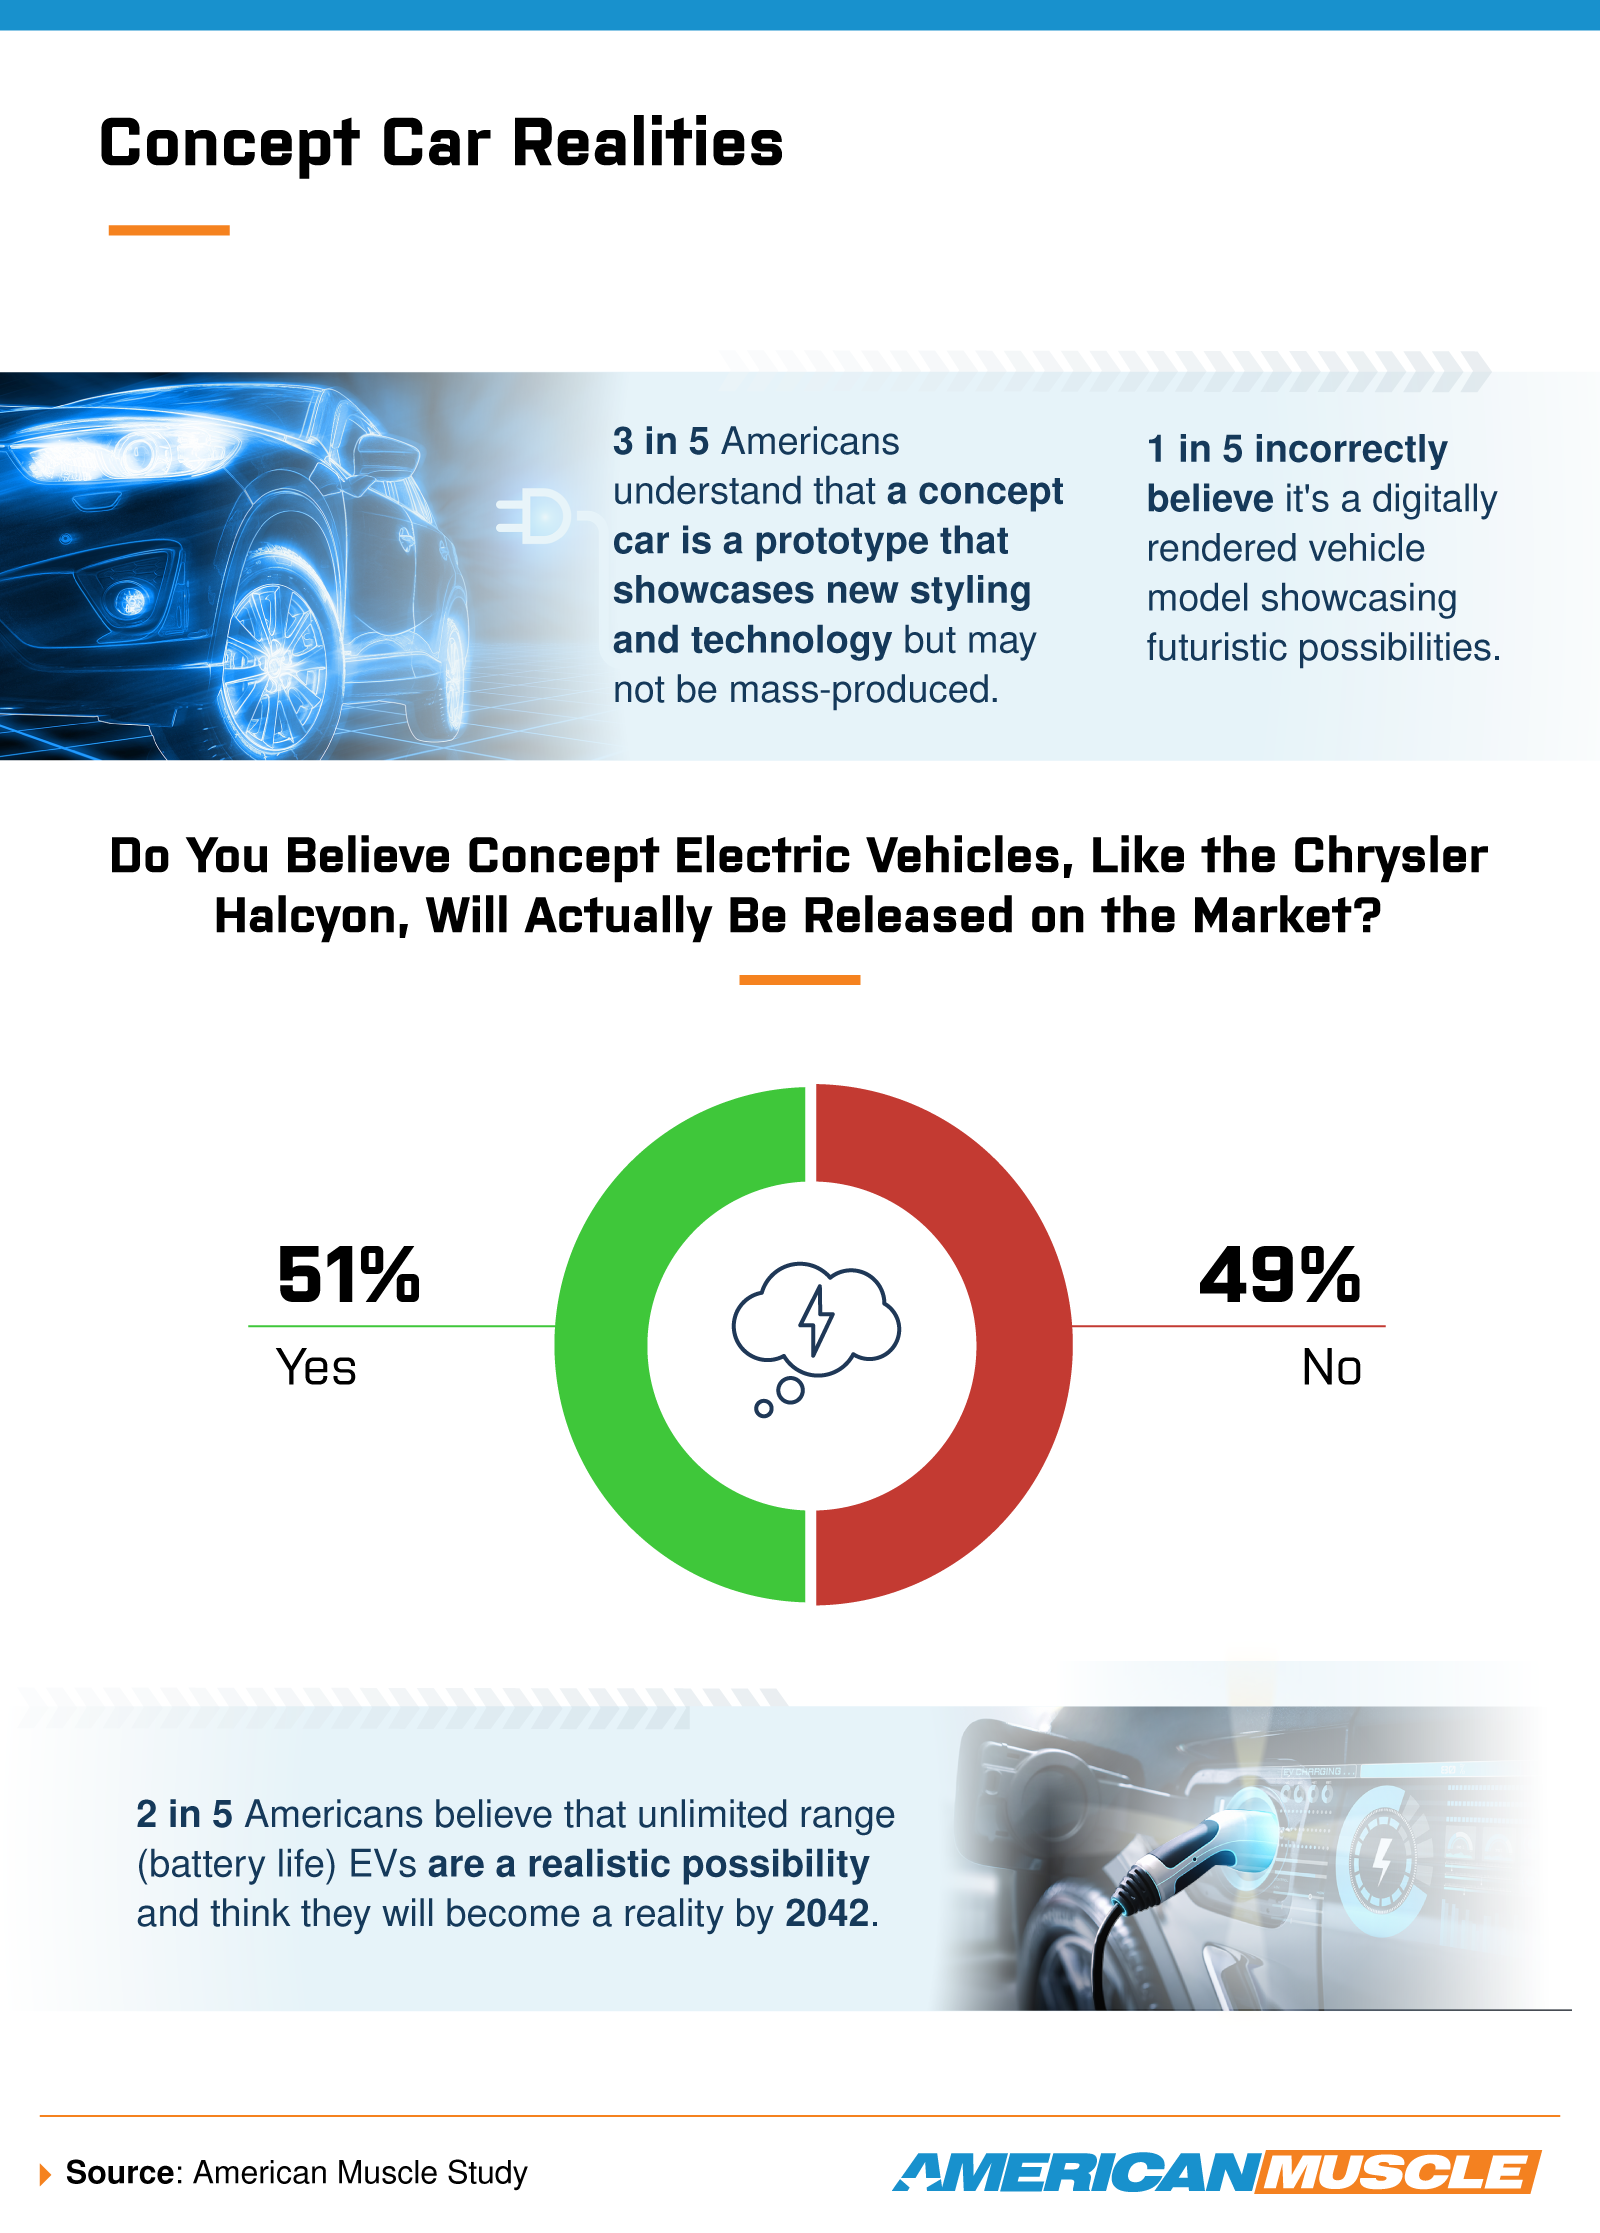 An infographic showing American thoughts toward concept cars and unlimited range